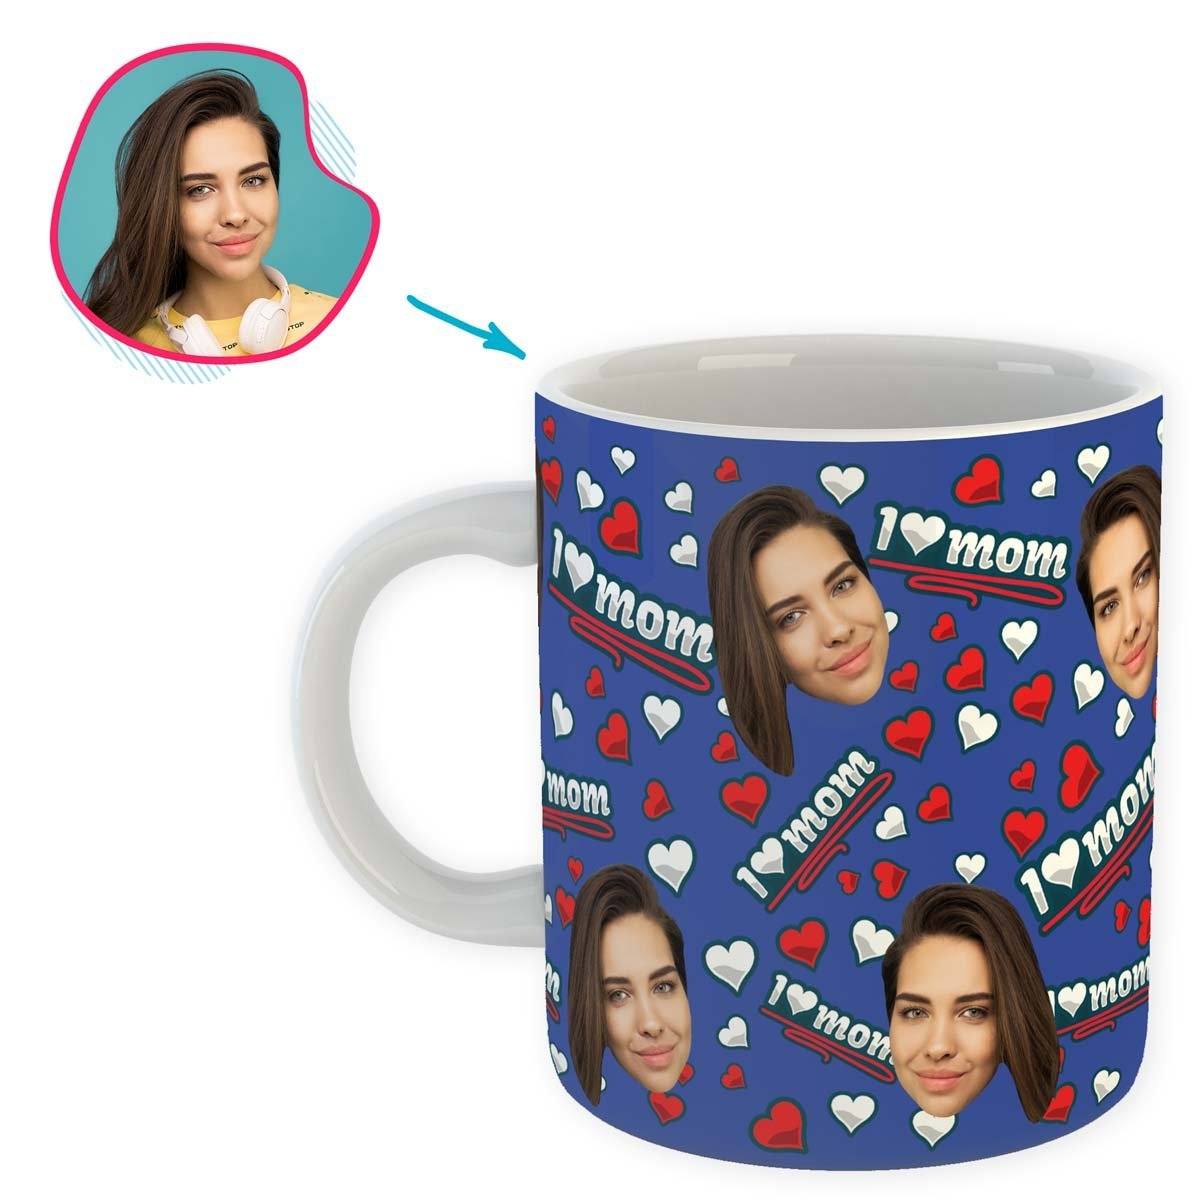 darkblue Love Mom mug personalized with photo of face printed on it